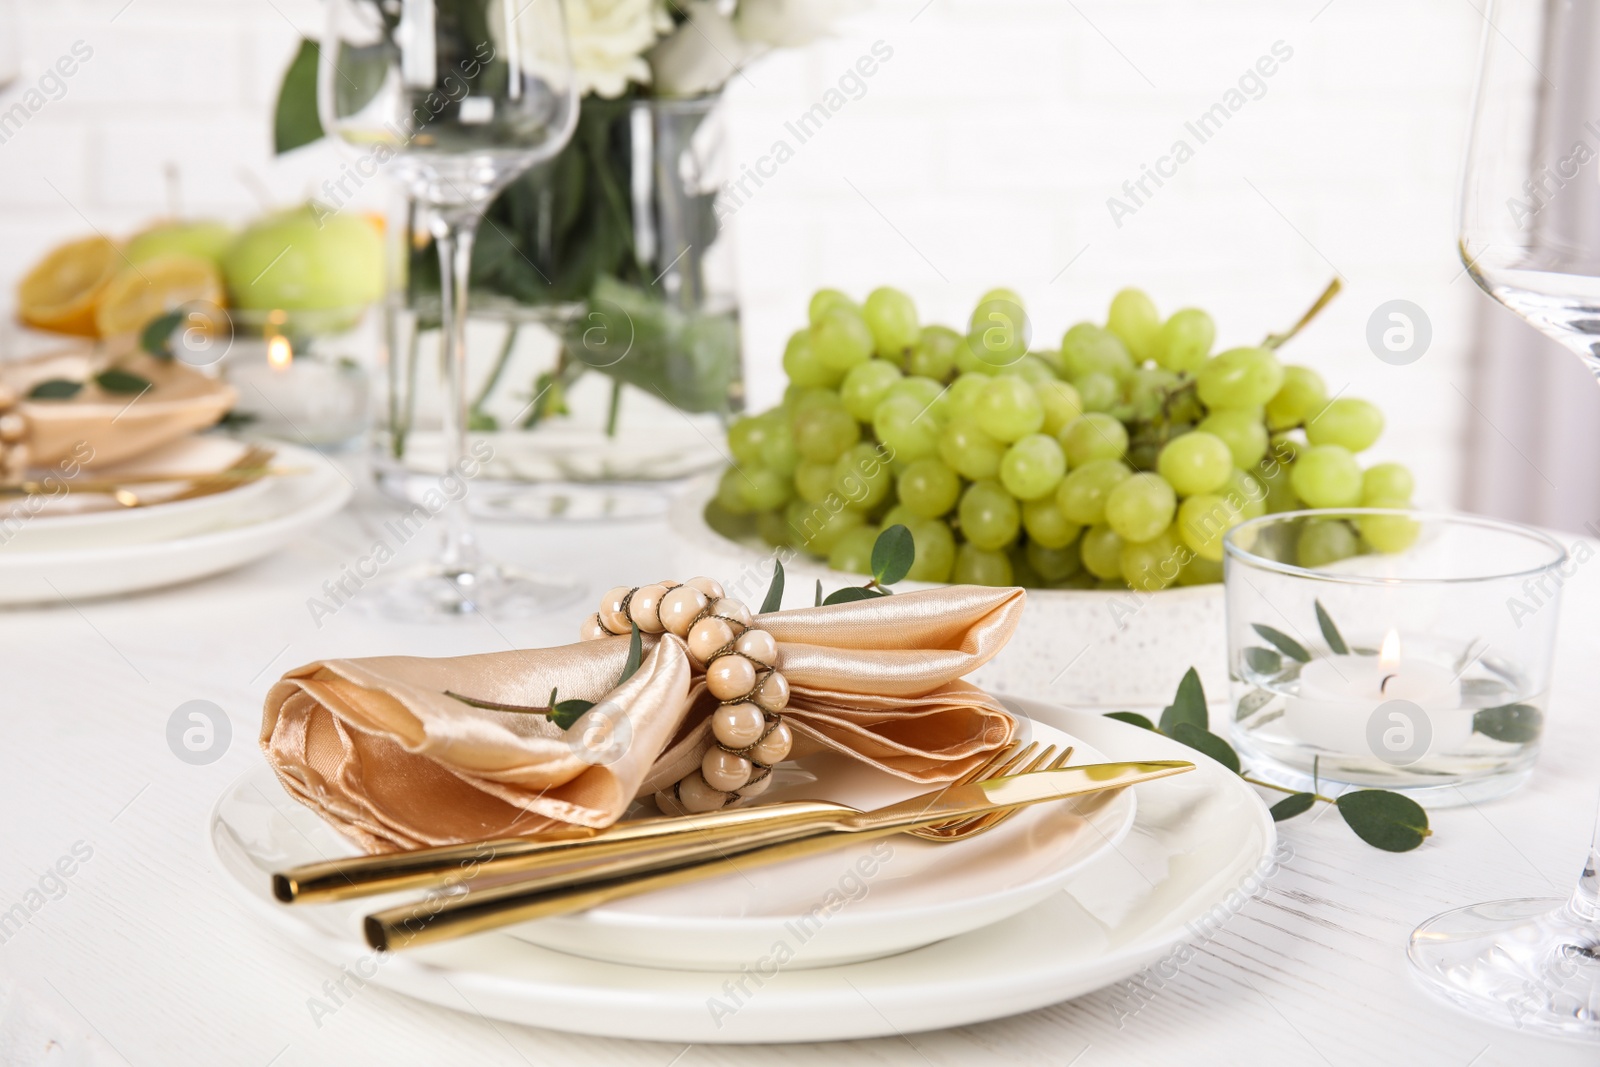 Photo of Elegant table setting with festive decoration in restaurant